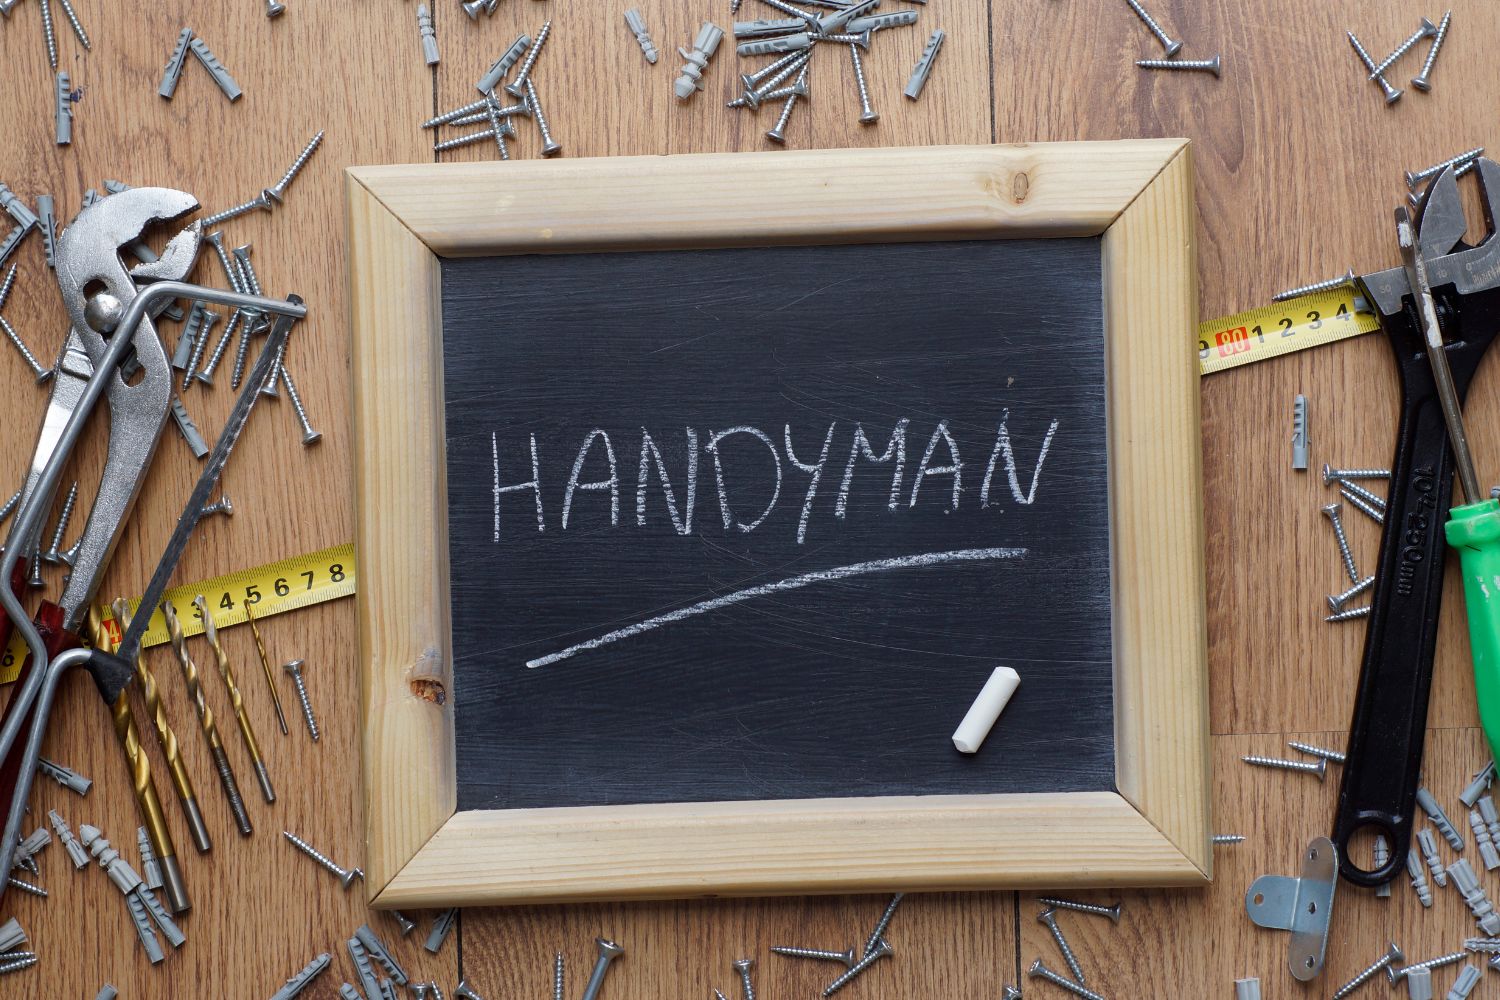 Local handyman services and local services vs company based services in The Woodlands